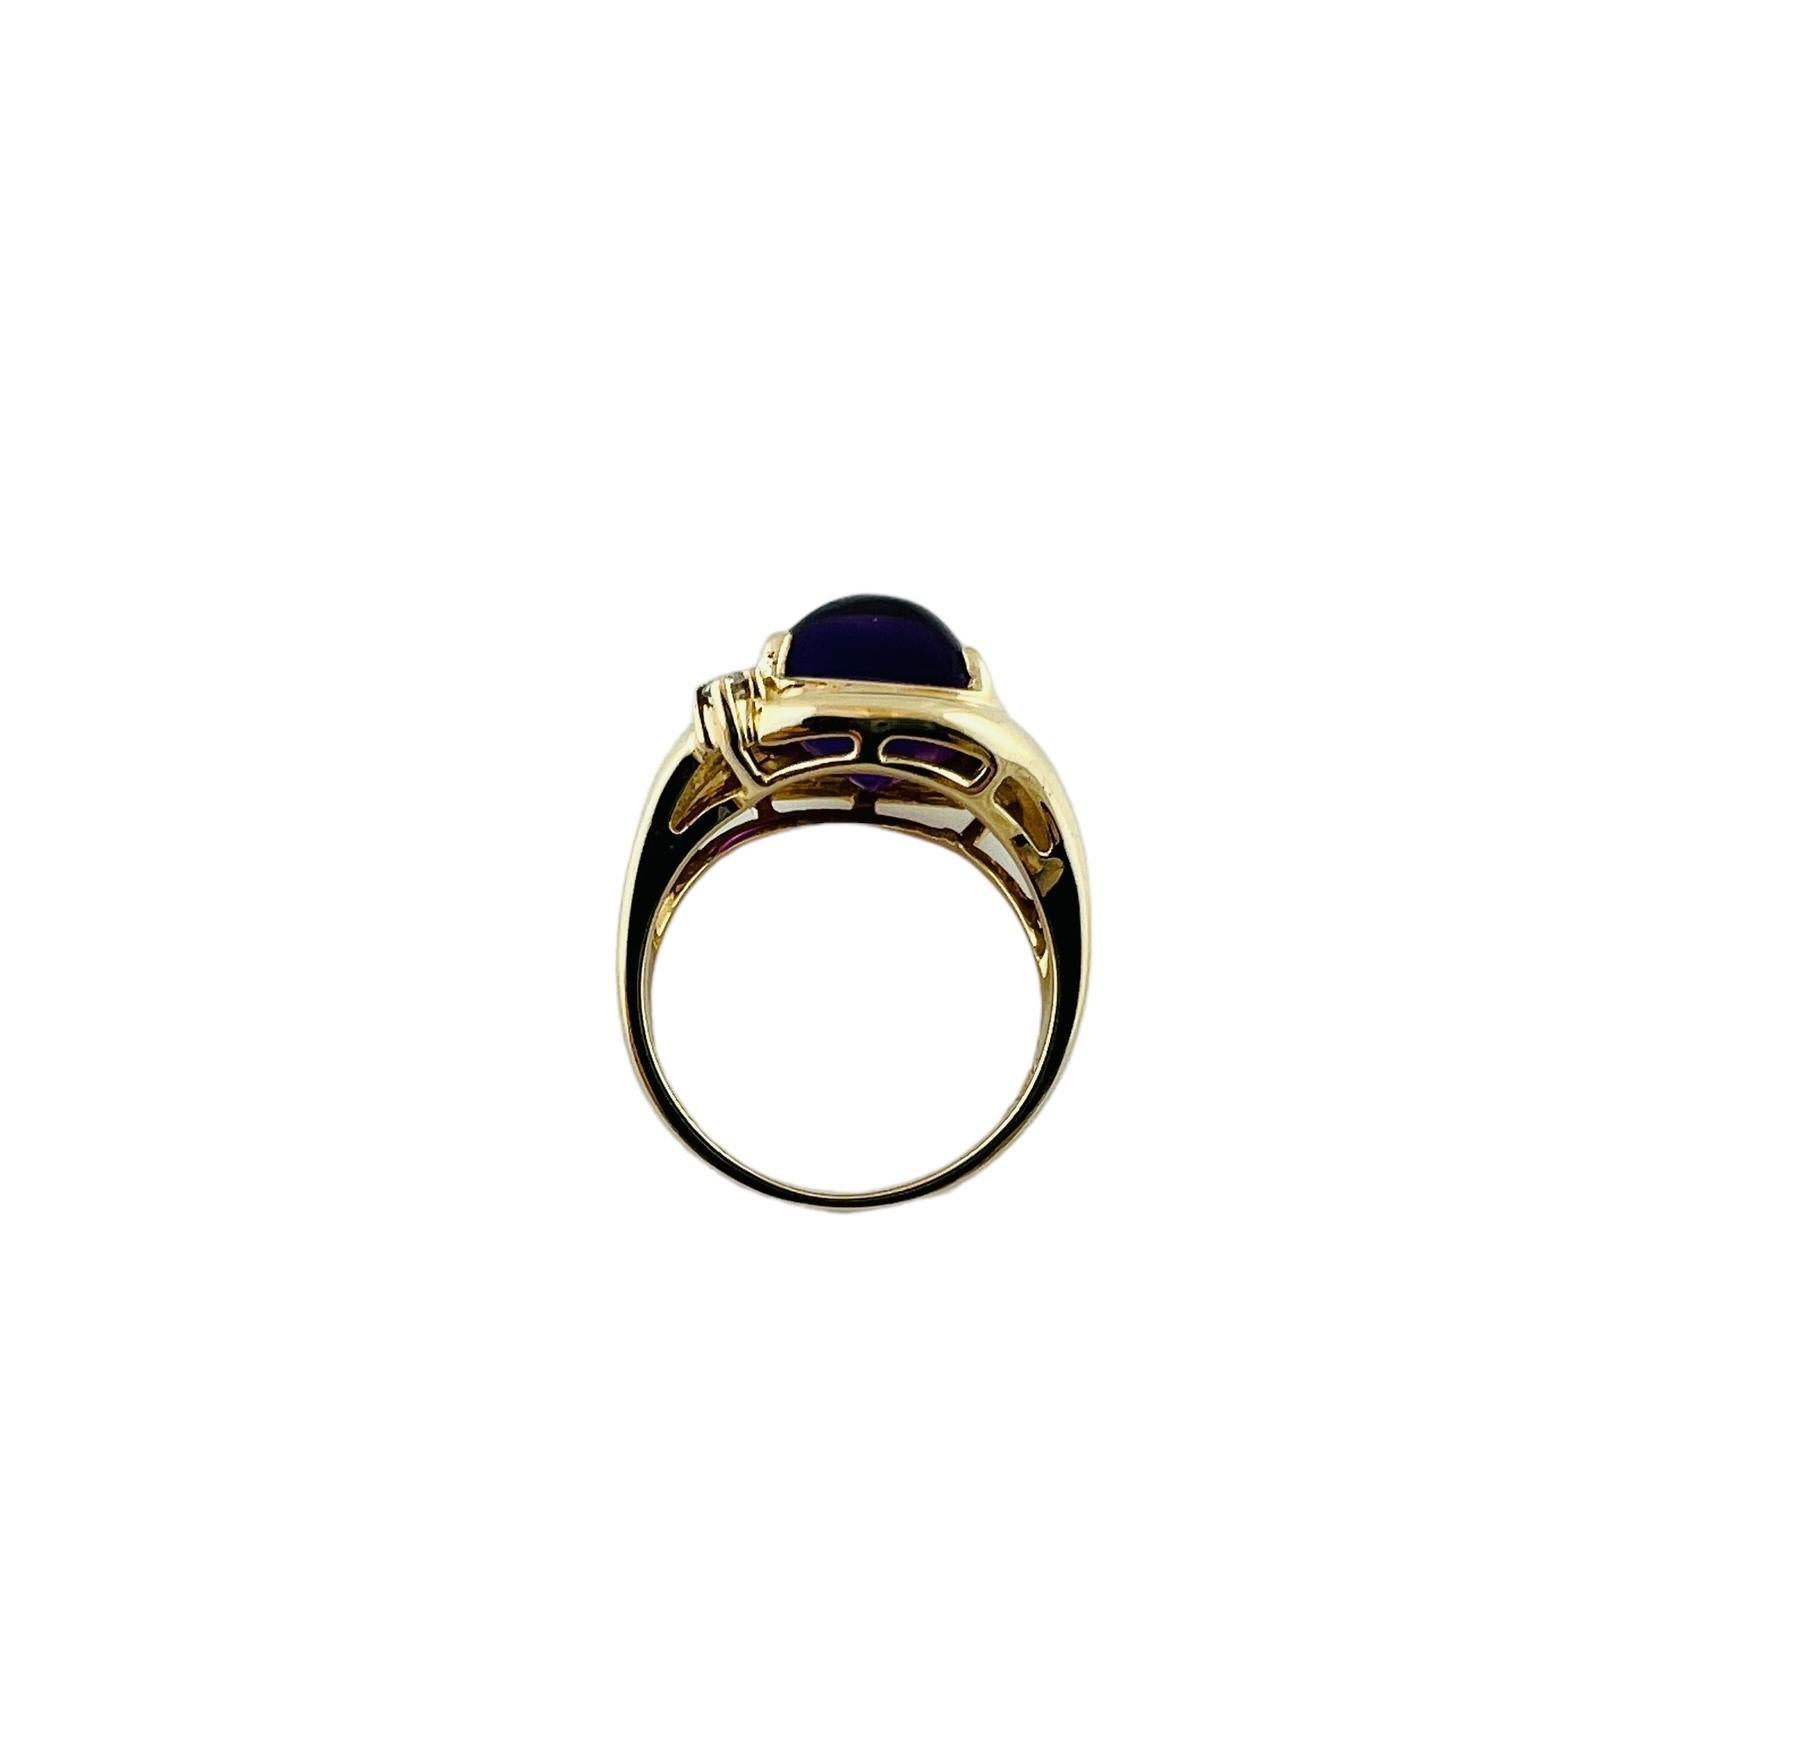 Cabochon 14K Yellow Gold Amethyst Diamond Ring Size 6.25 #15670 For Sale